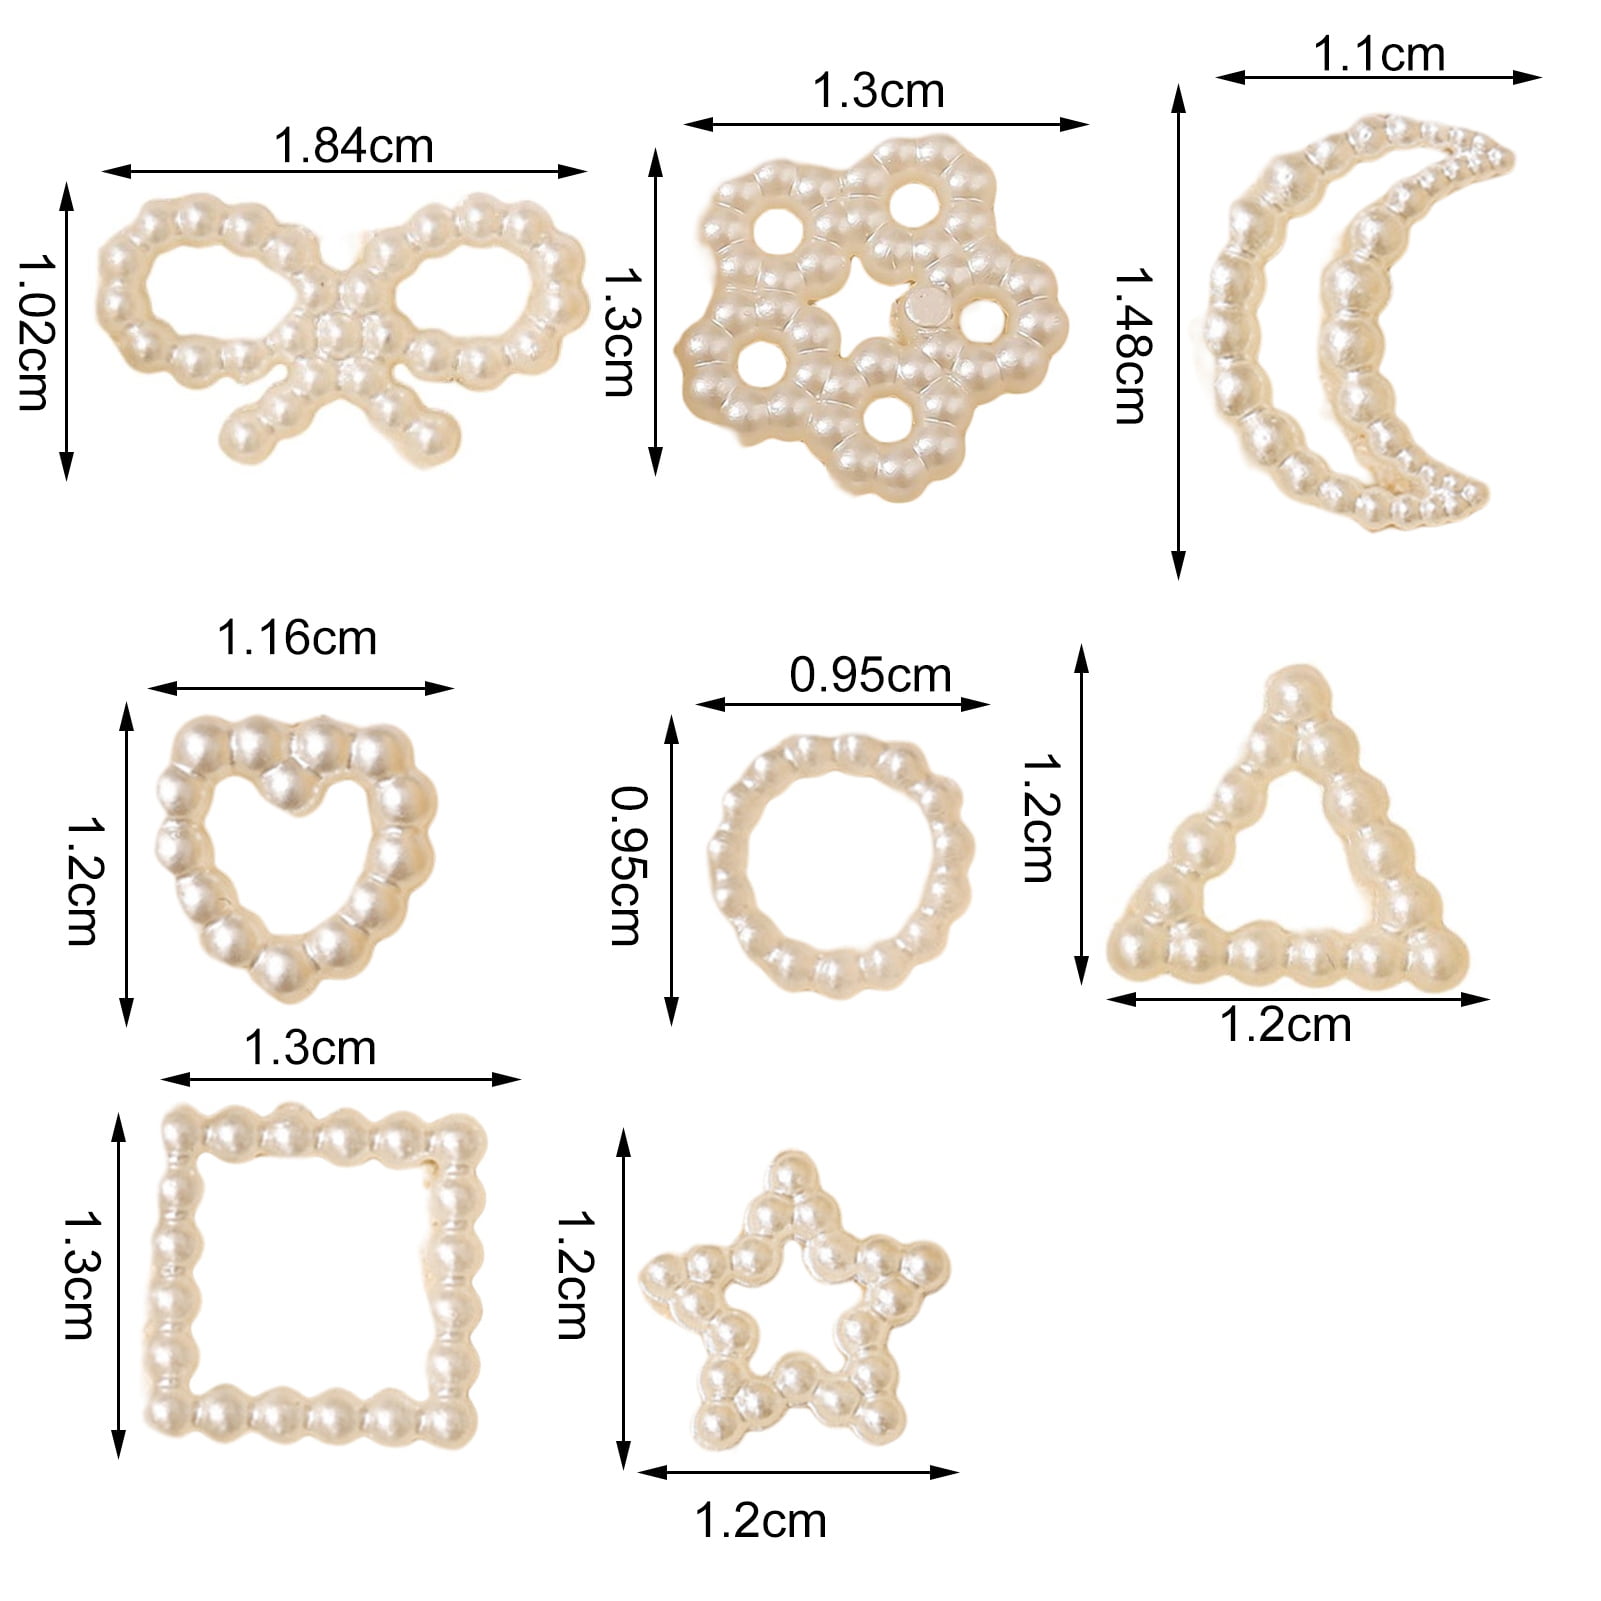 25g Lovely Heart-shaped Bow Children's Decorative Beads Mixed with